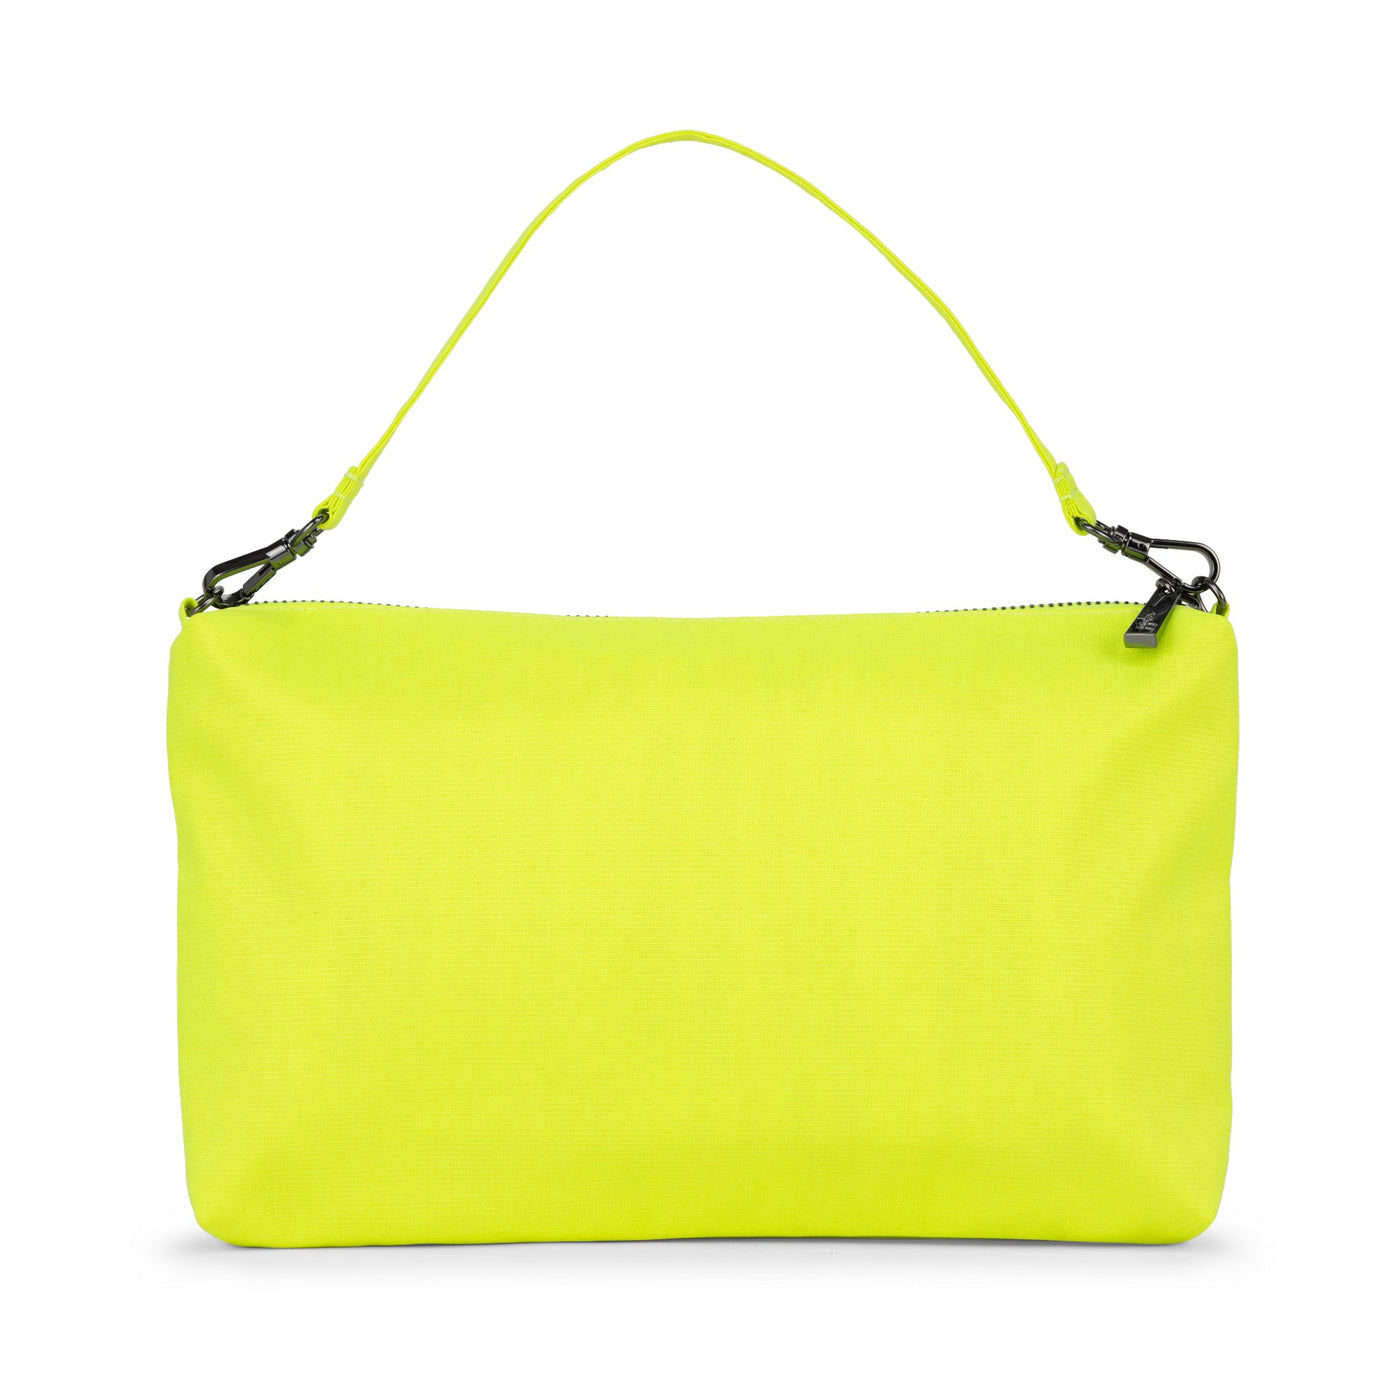 Be Quick - Highlighter Yellow by JuJuBe